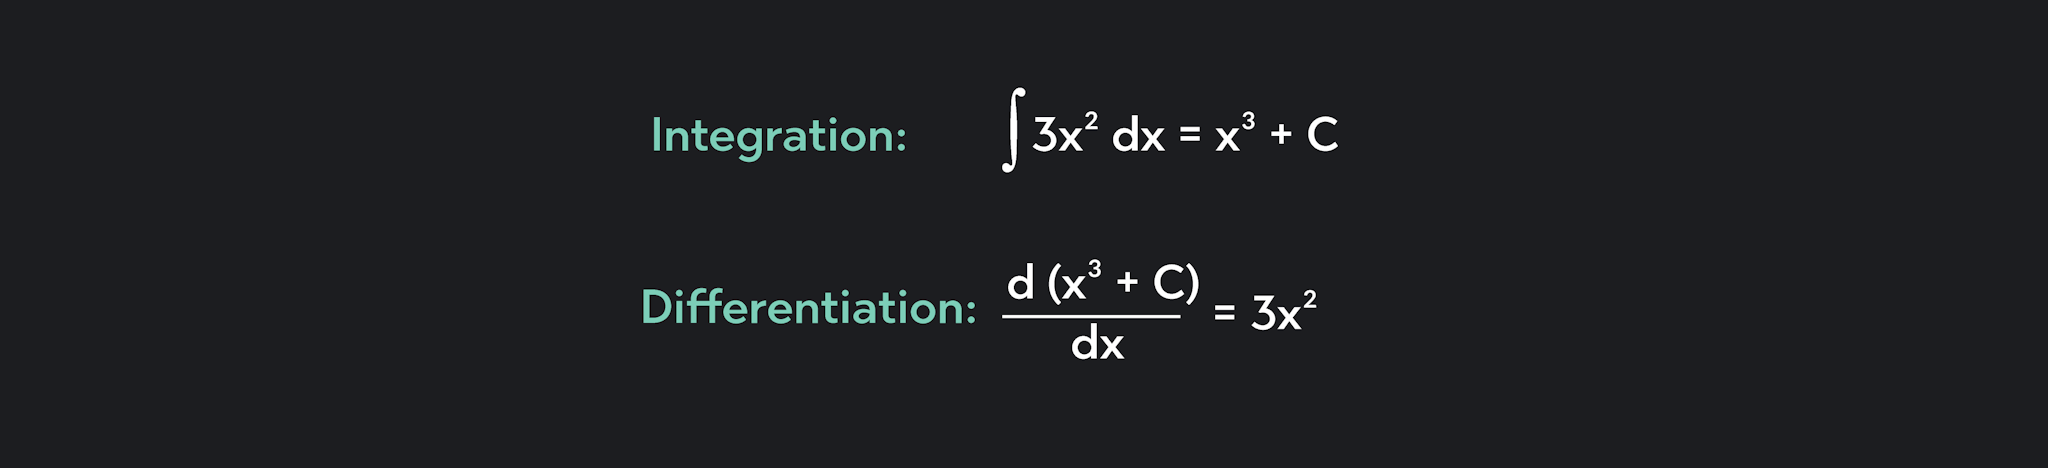 Graphic showing integration, differentiation, and relationship guaranteed by the First Fundamental Theorem of Calculus